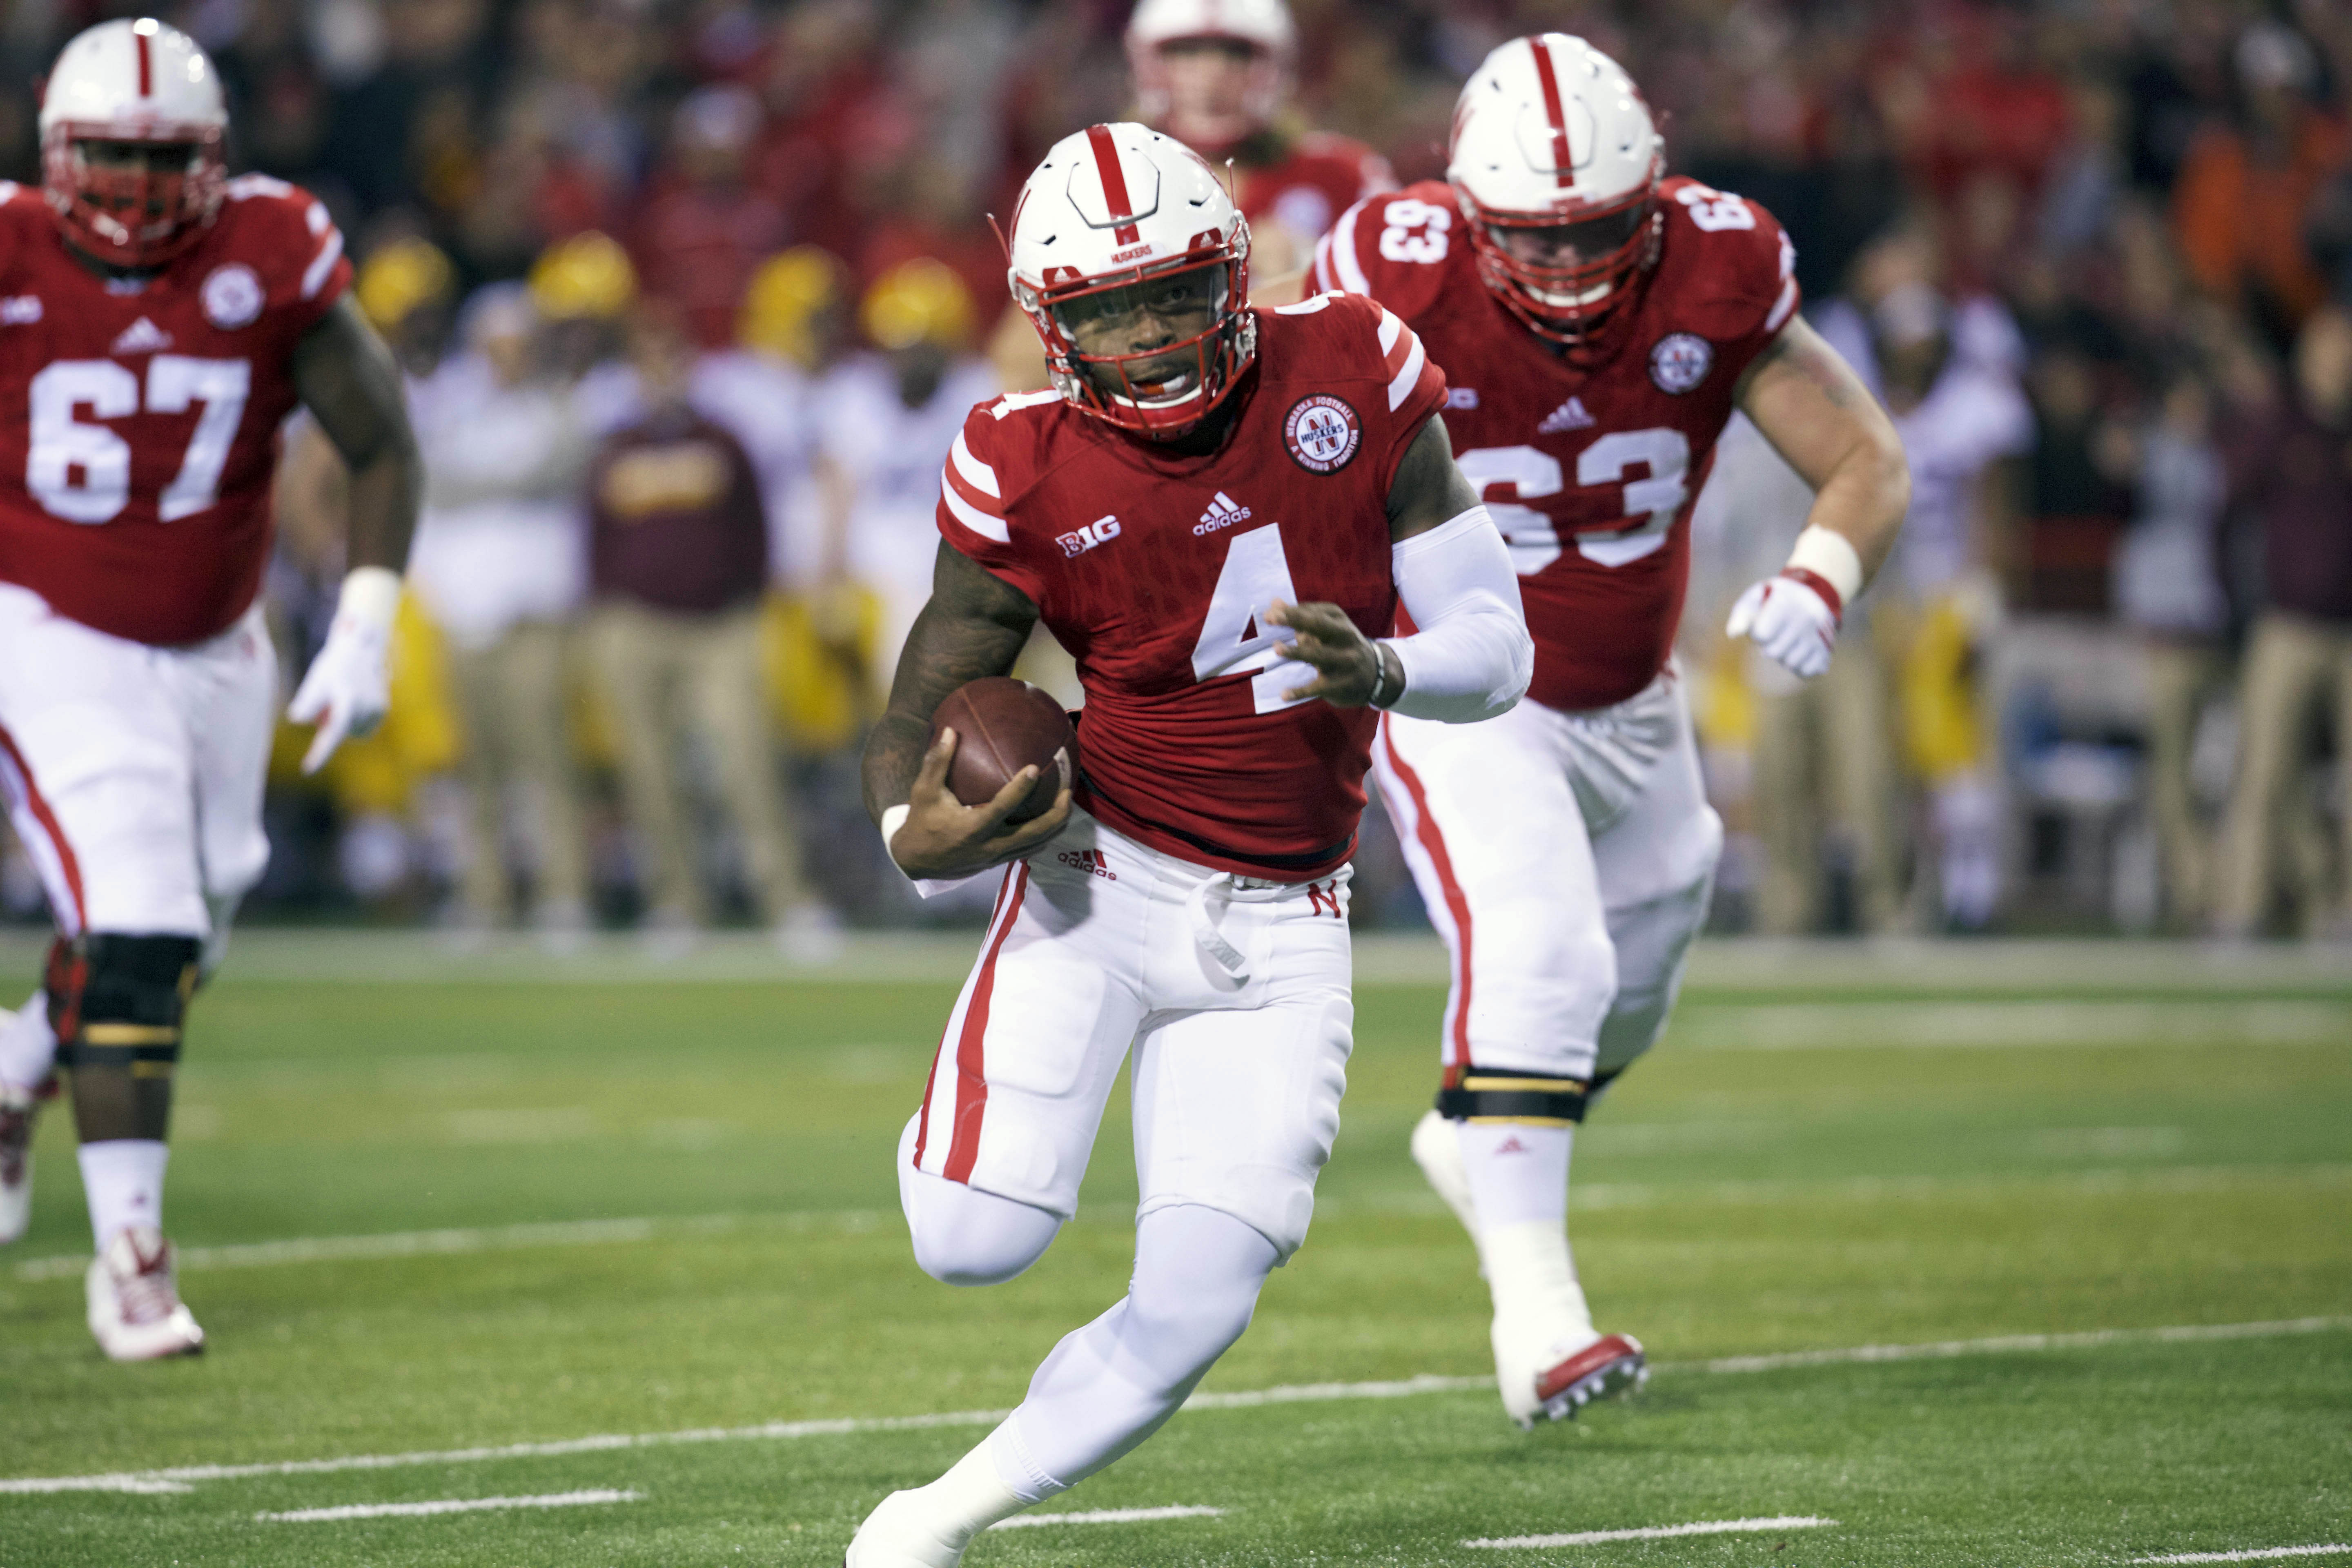 Music City Bowl preview Nebraska, Tennessee to rekindle bowl rivarly